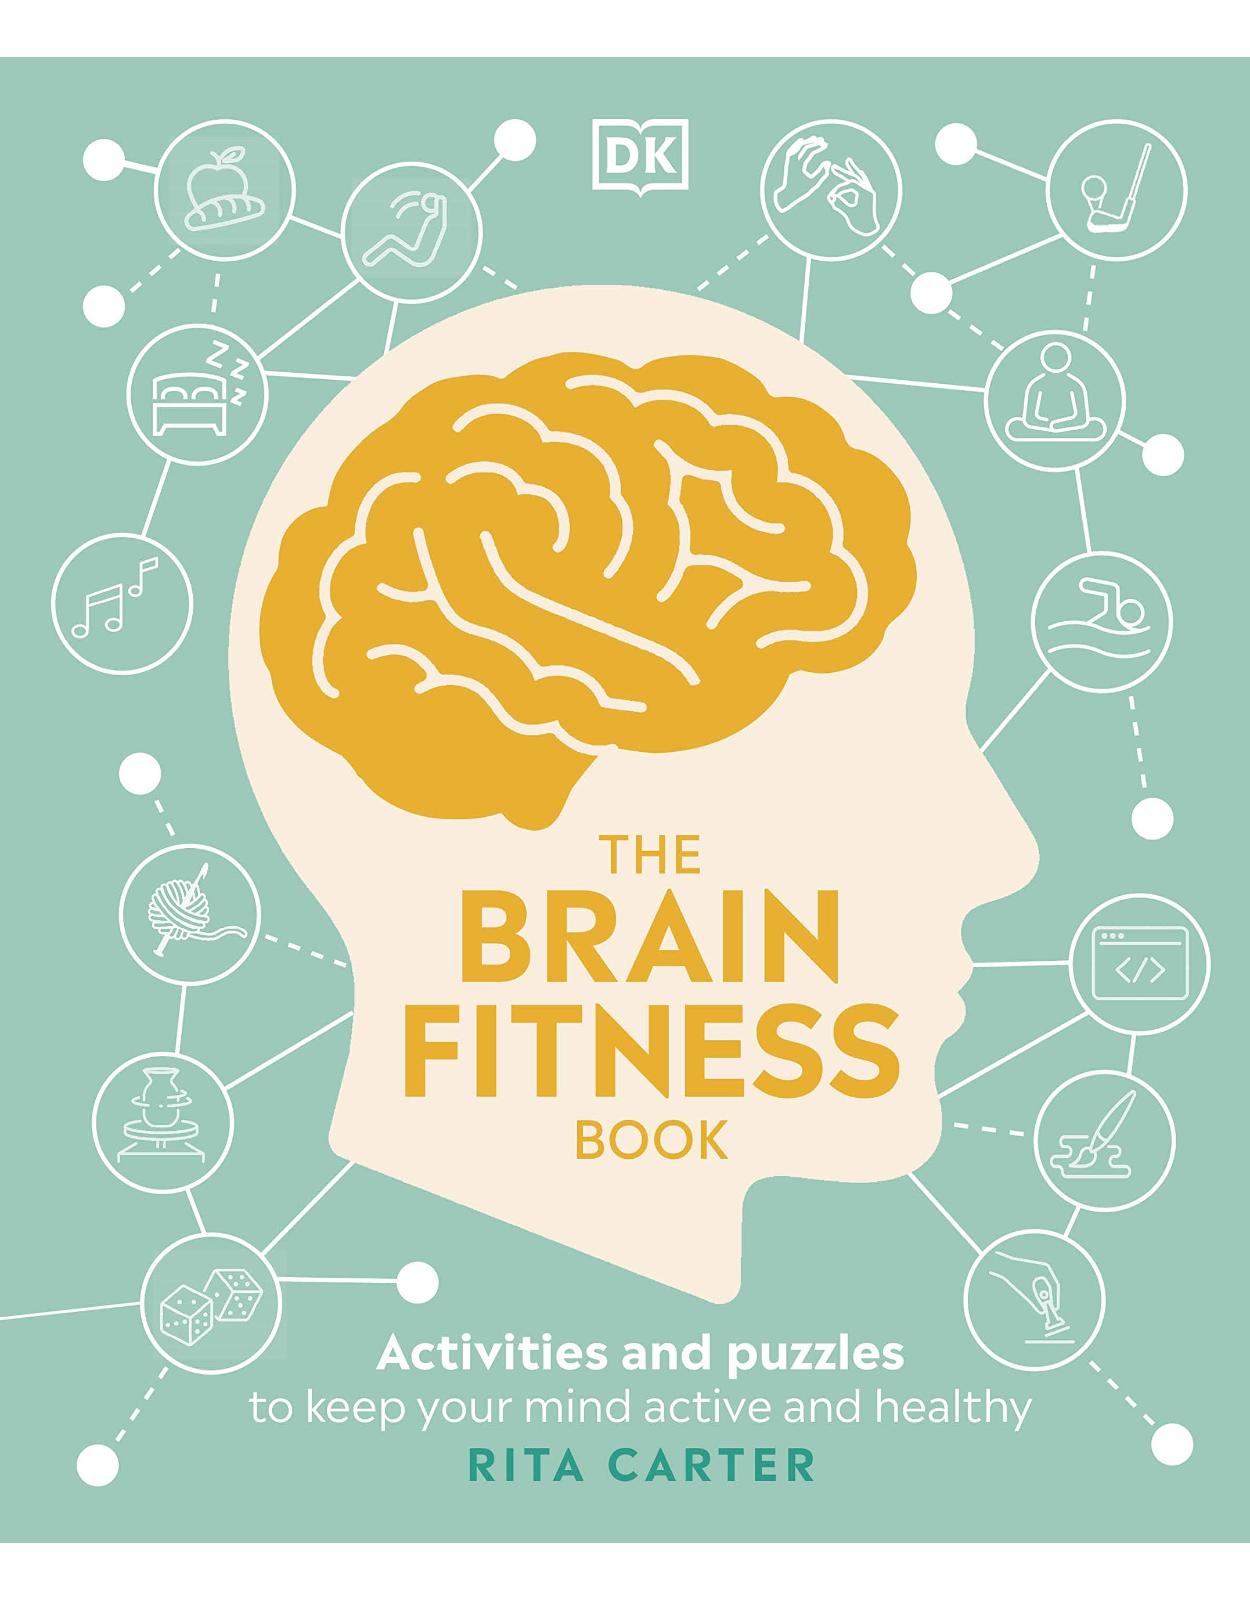 The Brain Fitness Book: Activities and Puzzles to Keep Your Mind Active and Healthy